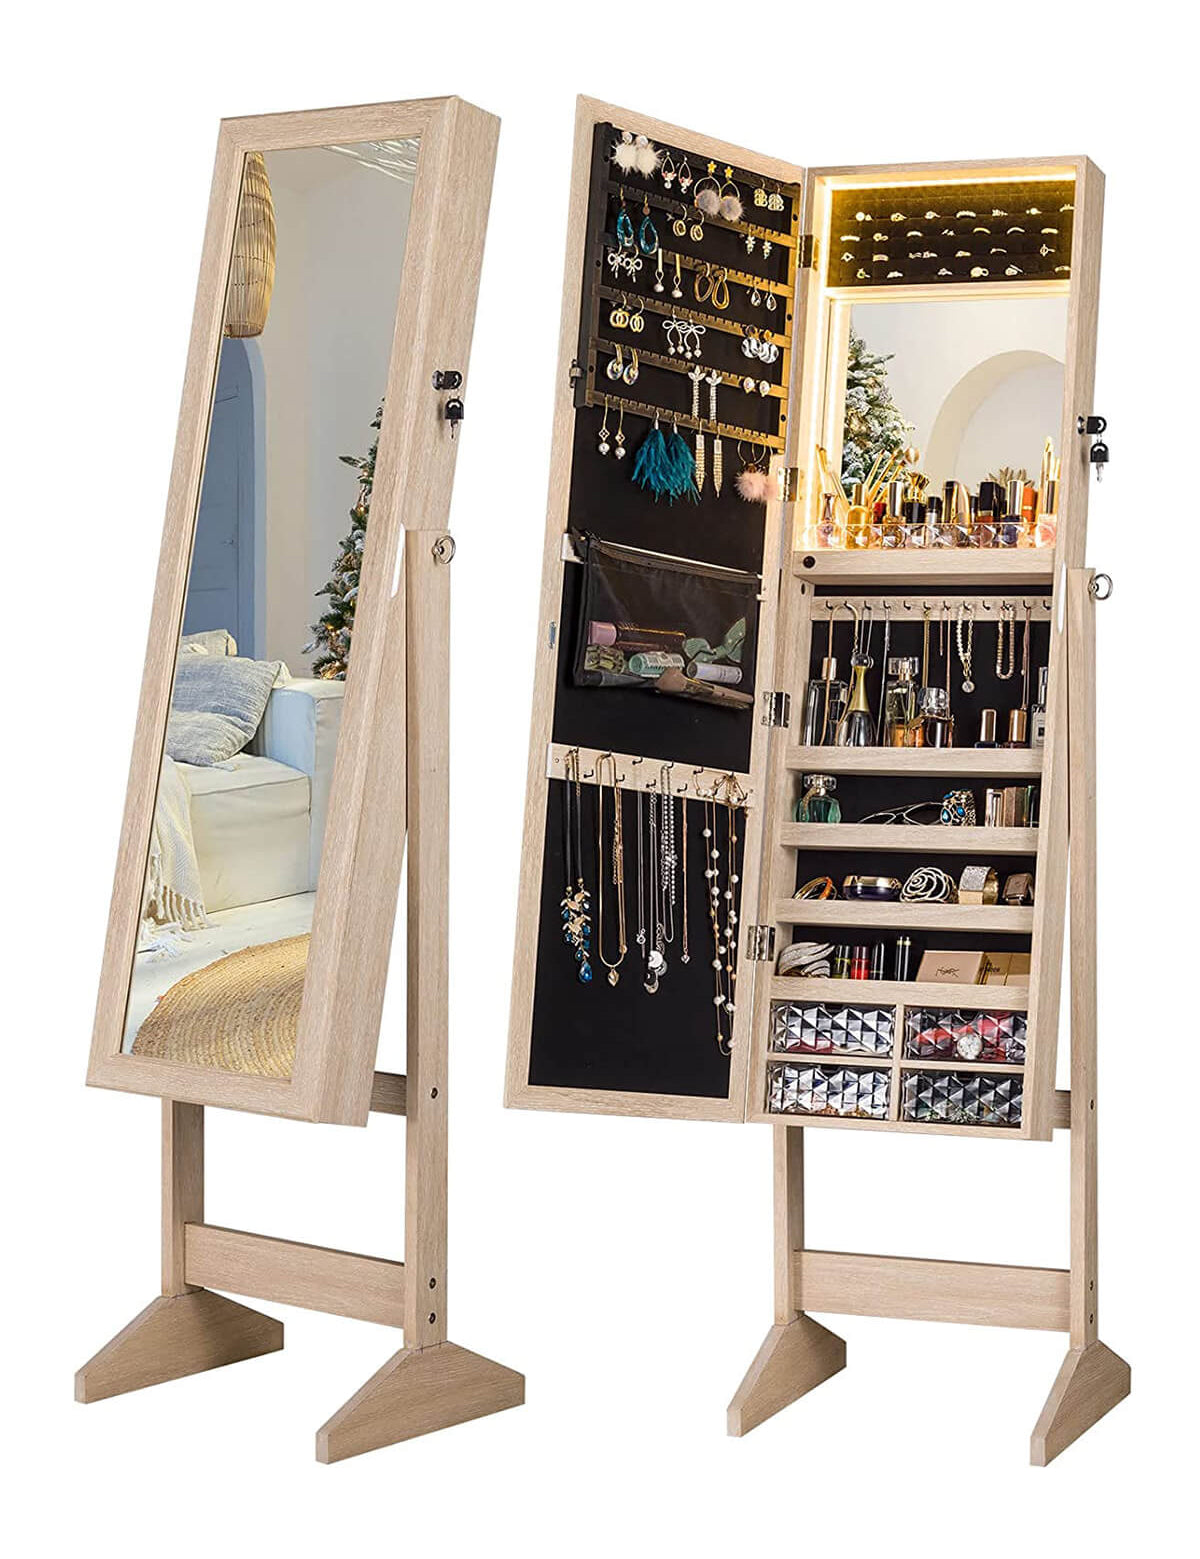 Luxfurni | Jewelry Armoire | Standing Stella 6 Jewelry Armoire Full Length Mirror With Built-in Lights - Natural